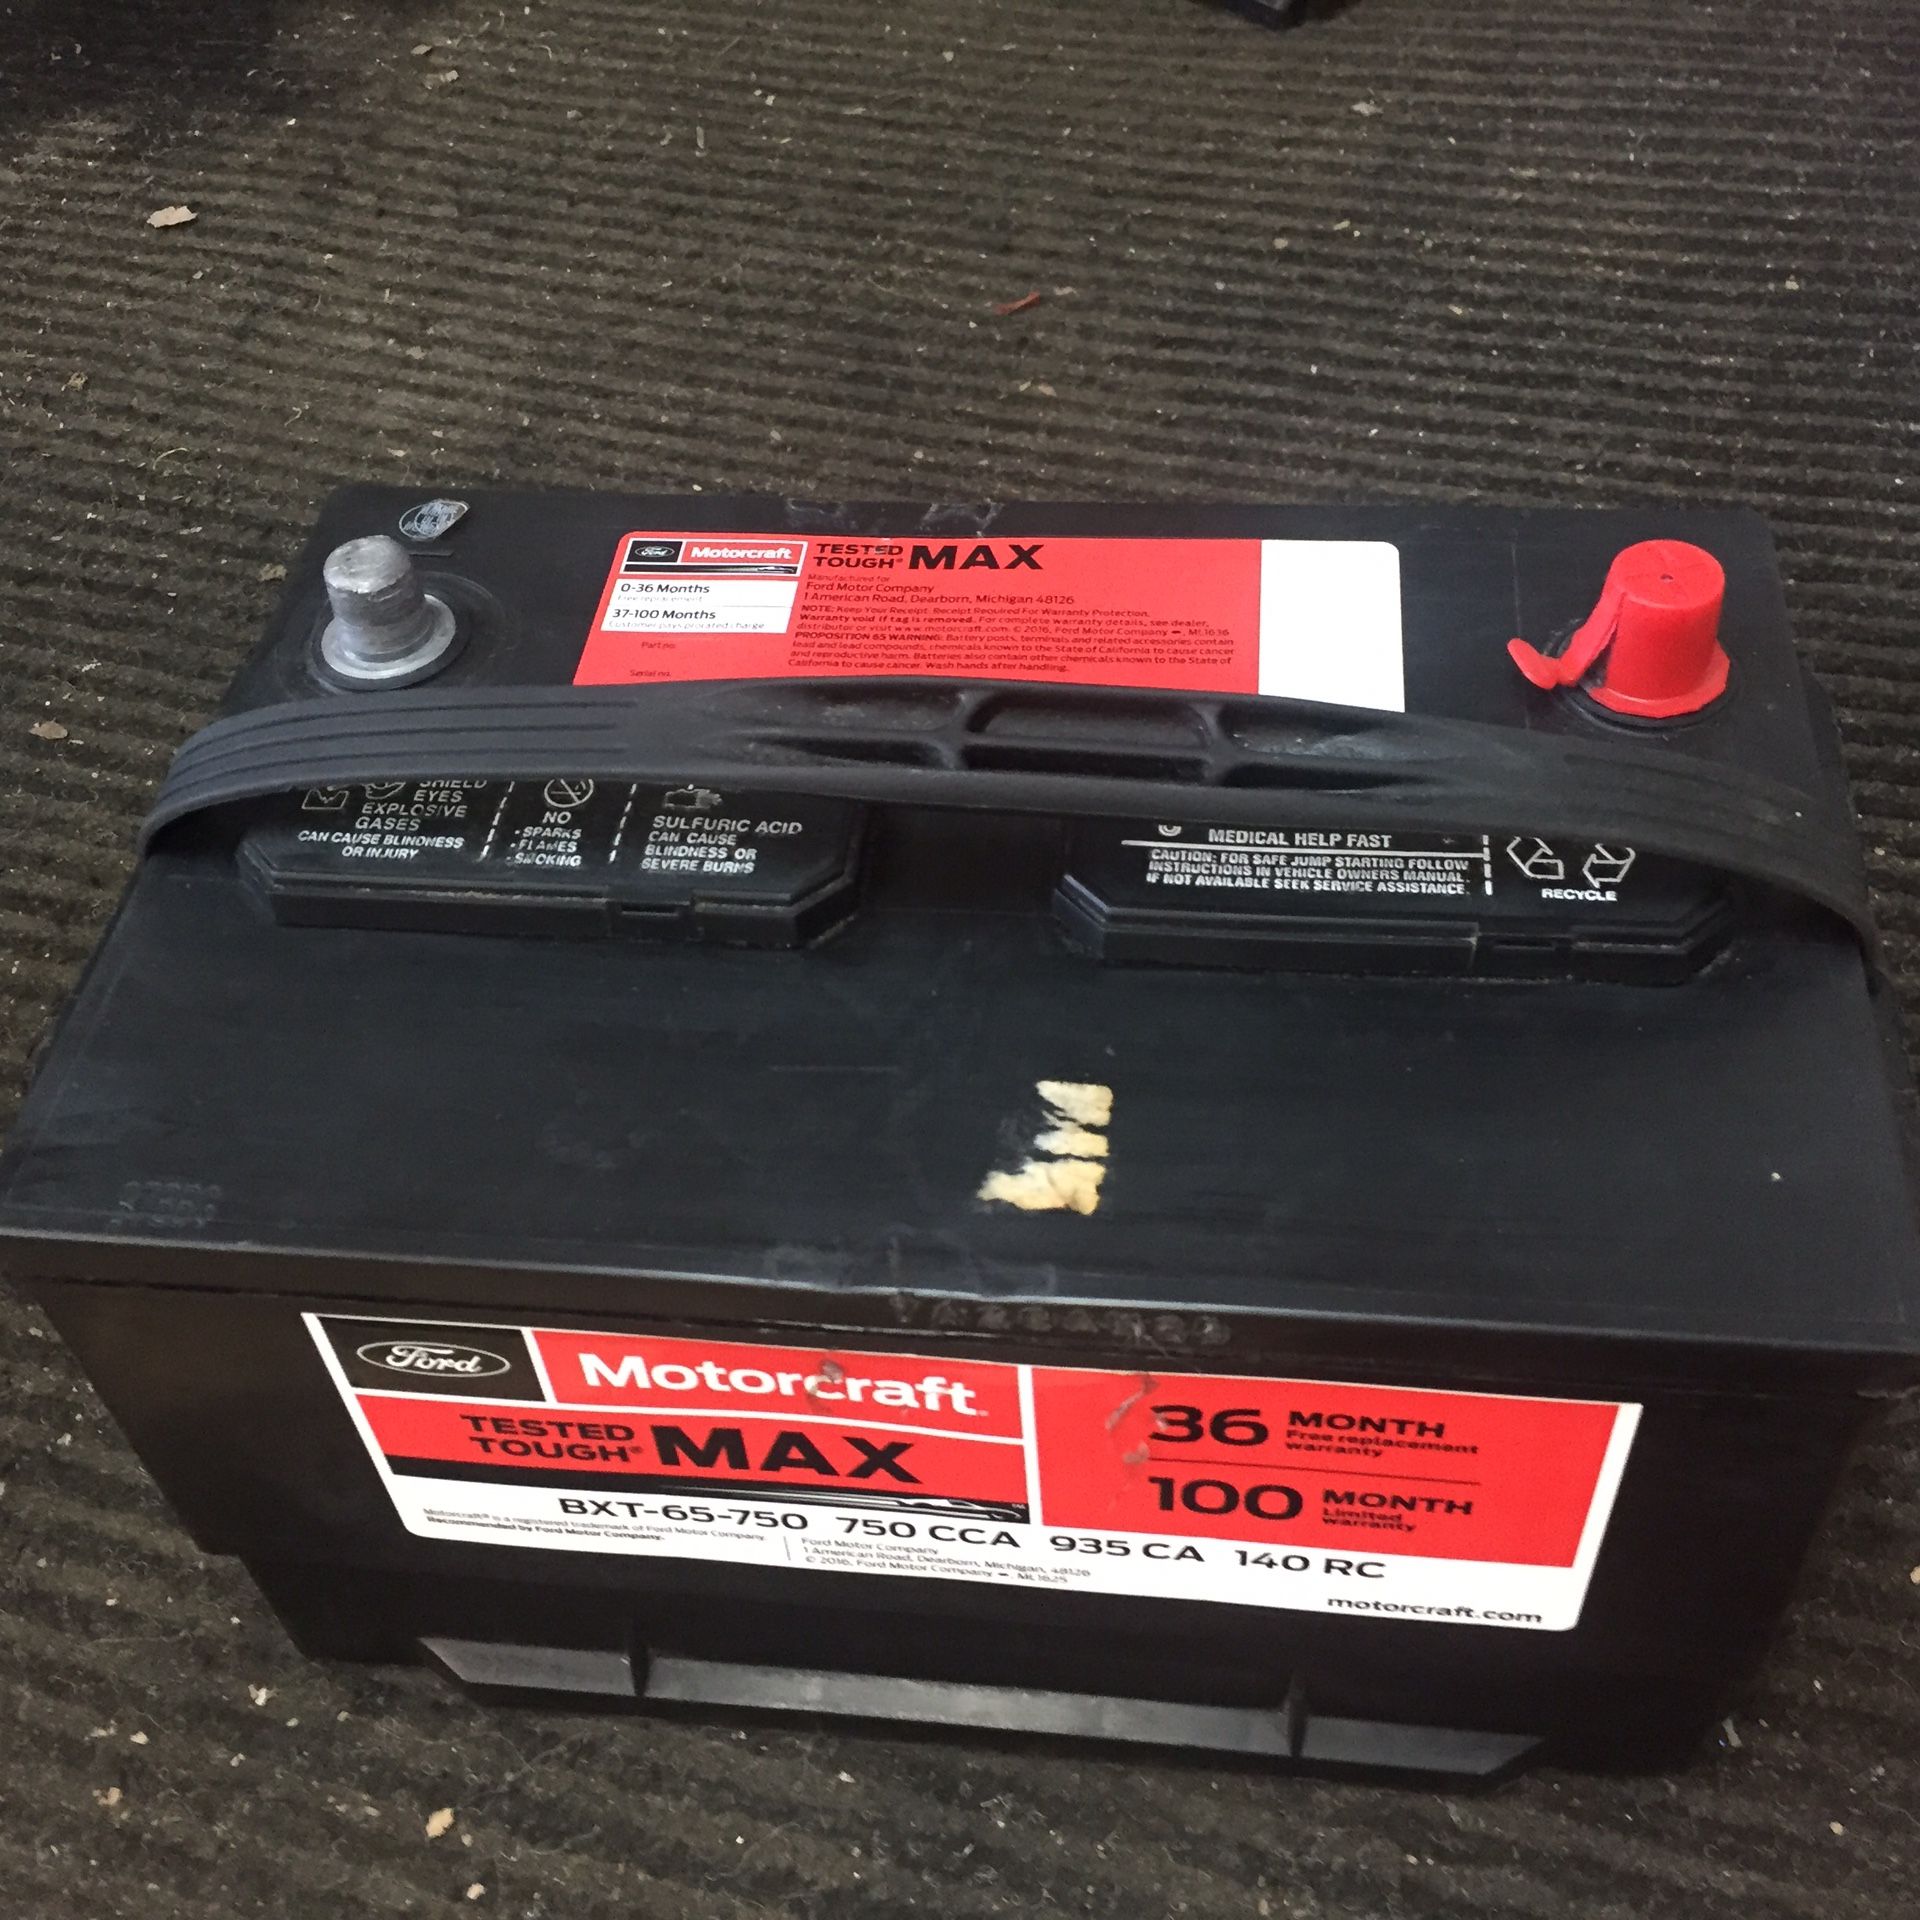 Group 65 2017 Ford Motorcraft Batteries